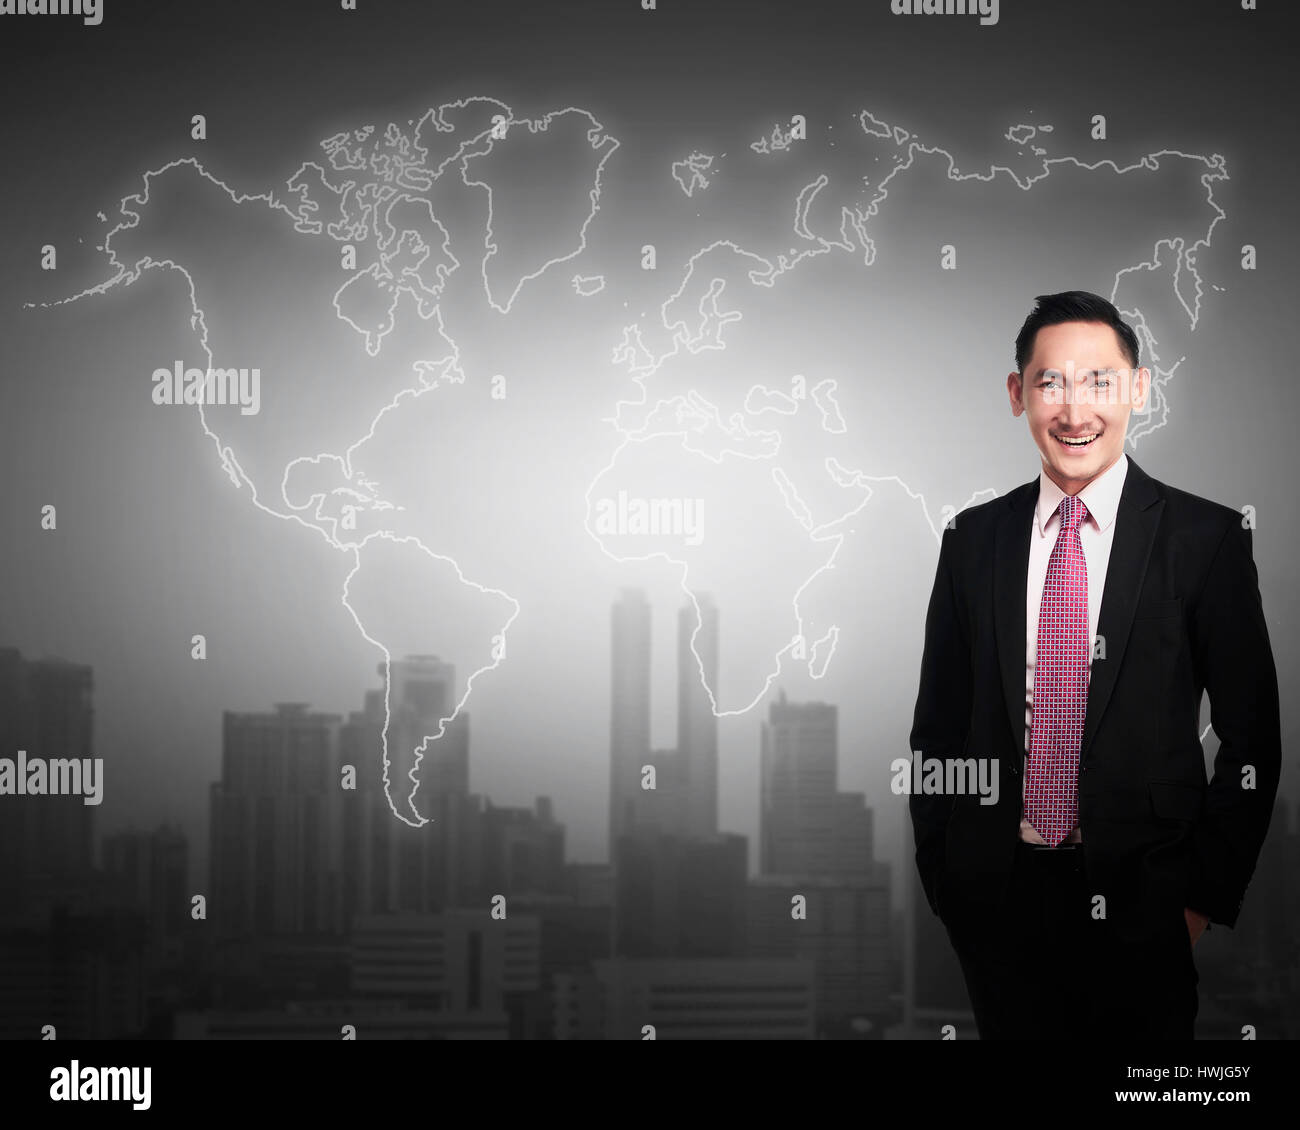 Business man standing in front of world map. Business globalization concept Stock Photo